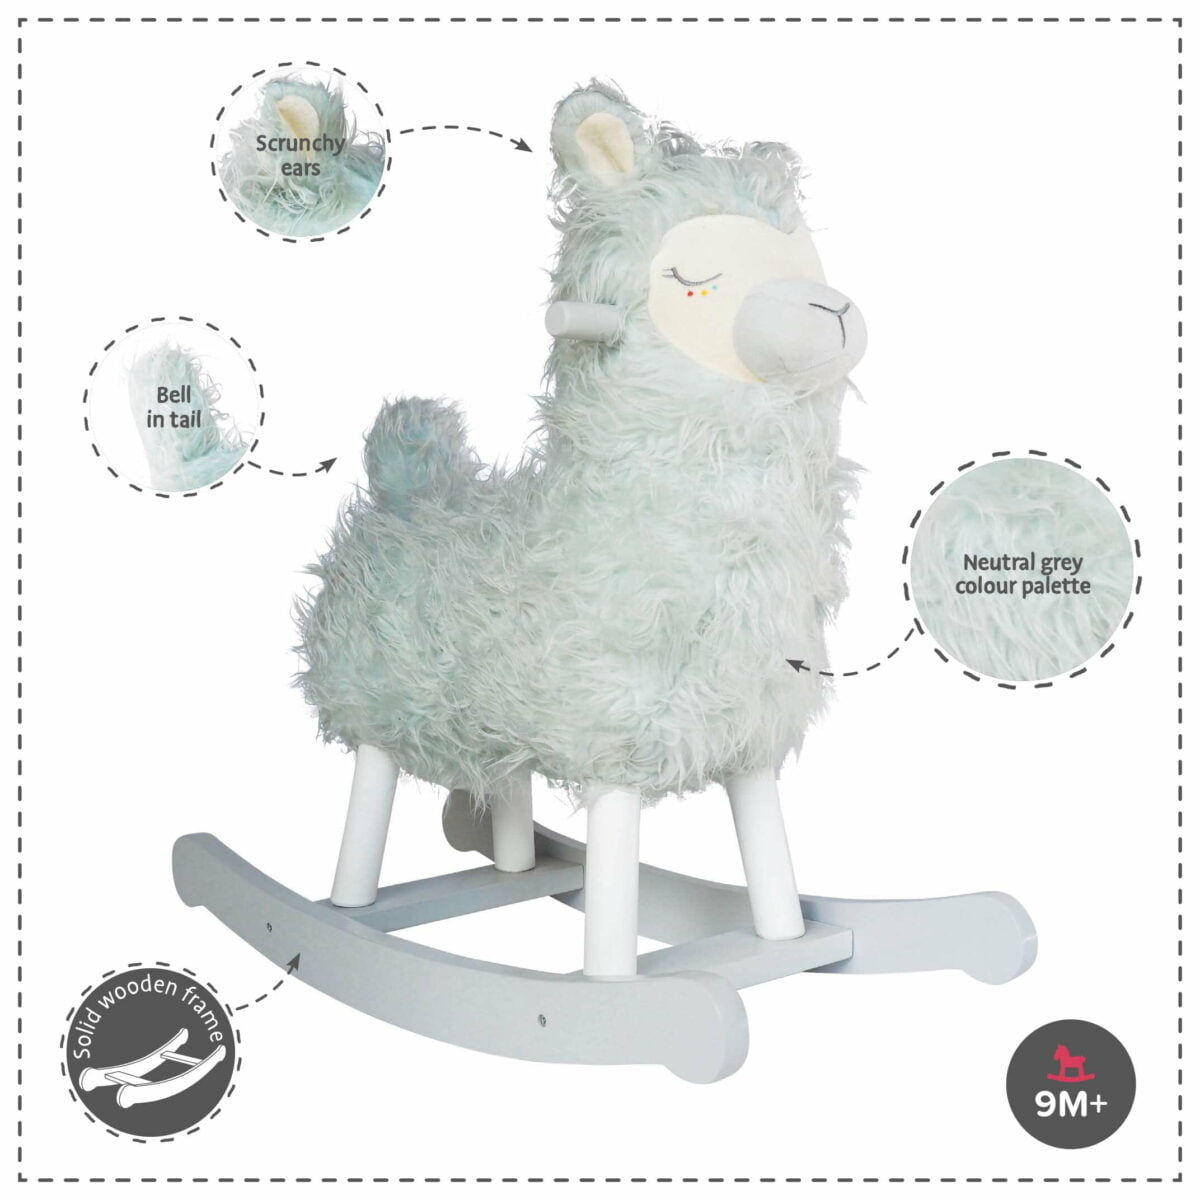 Features and benefits displayed for Rio Rocking Llama